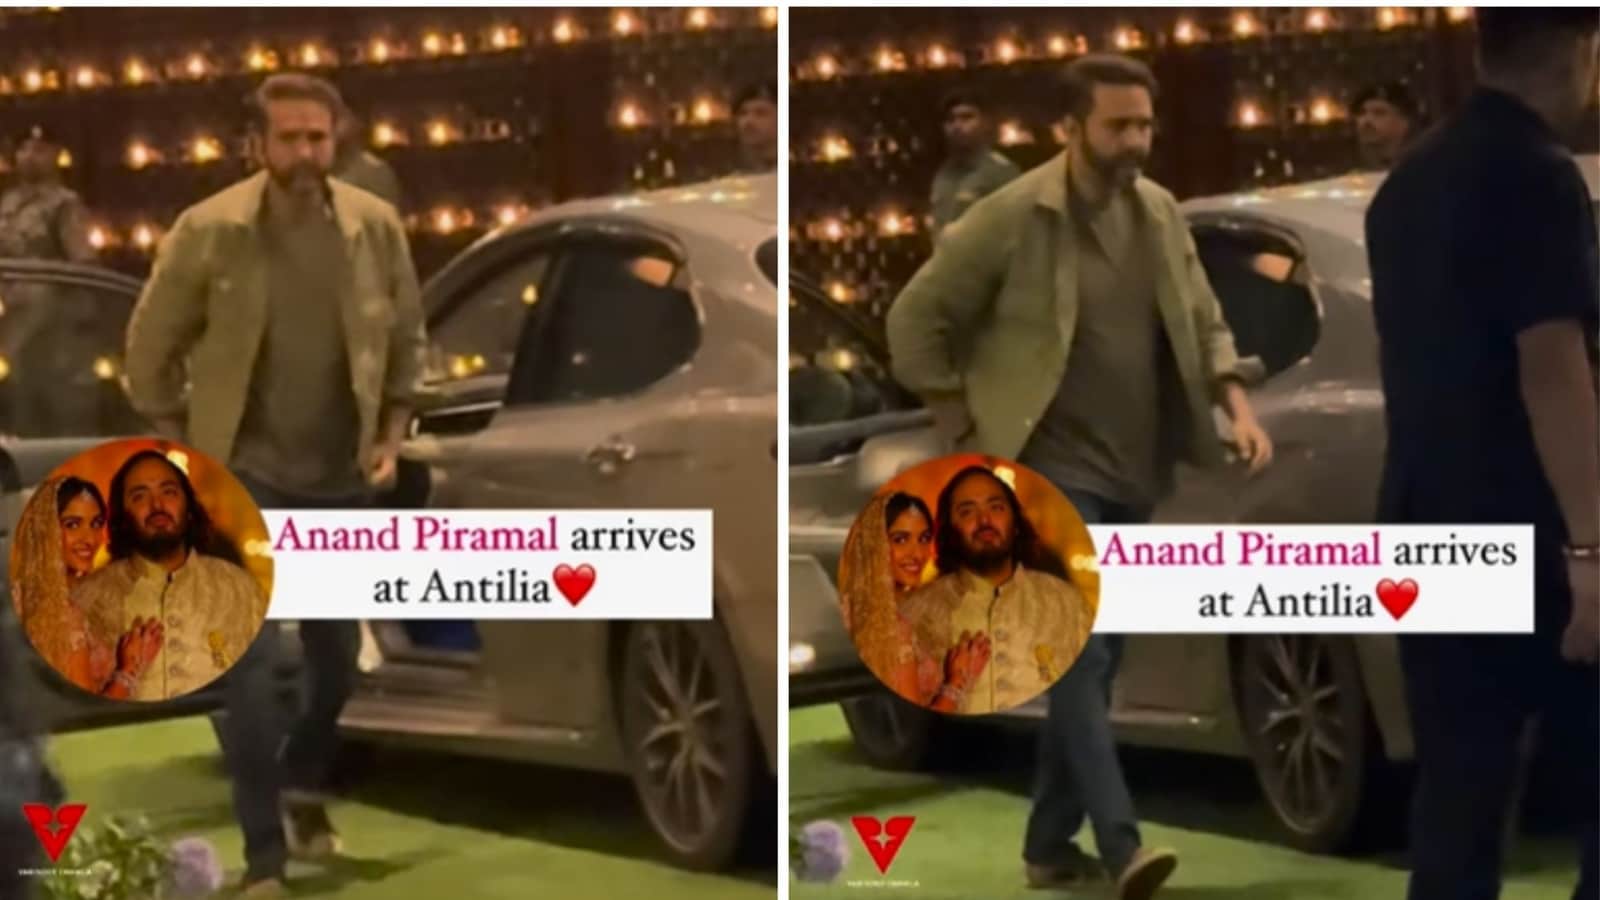 Billionaire Anand Piramal arrives at Antilia in Toyota Camry. People praise his ‘simplicity’